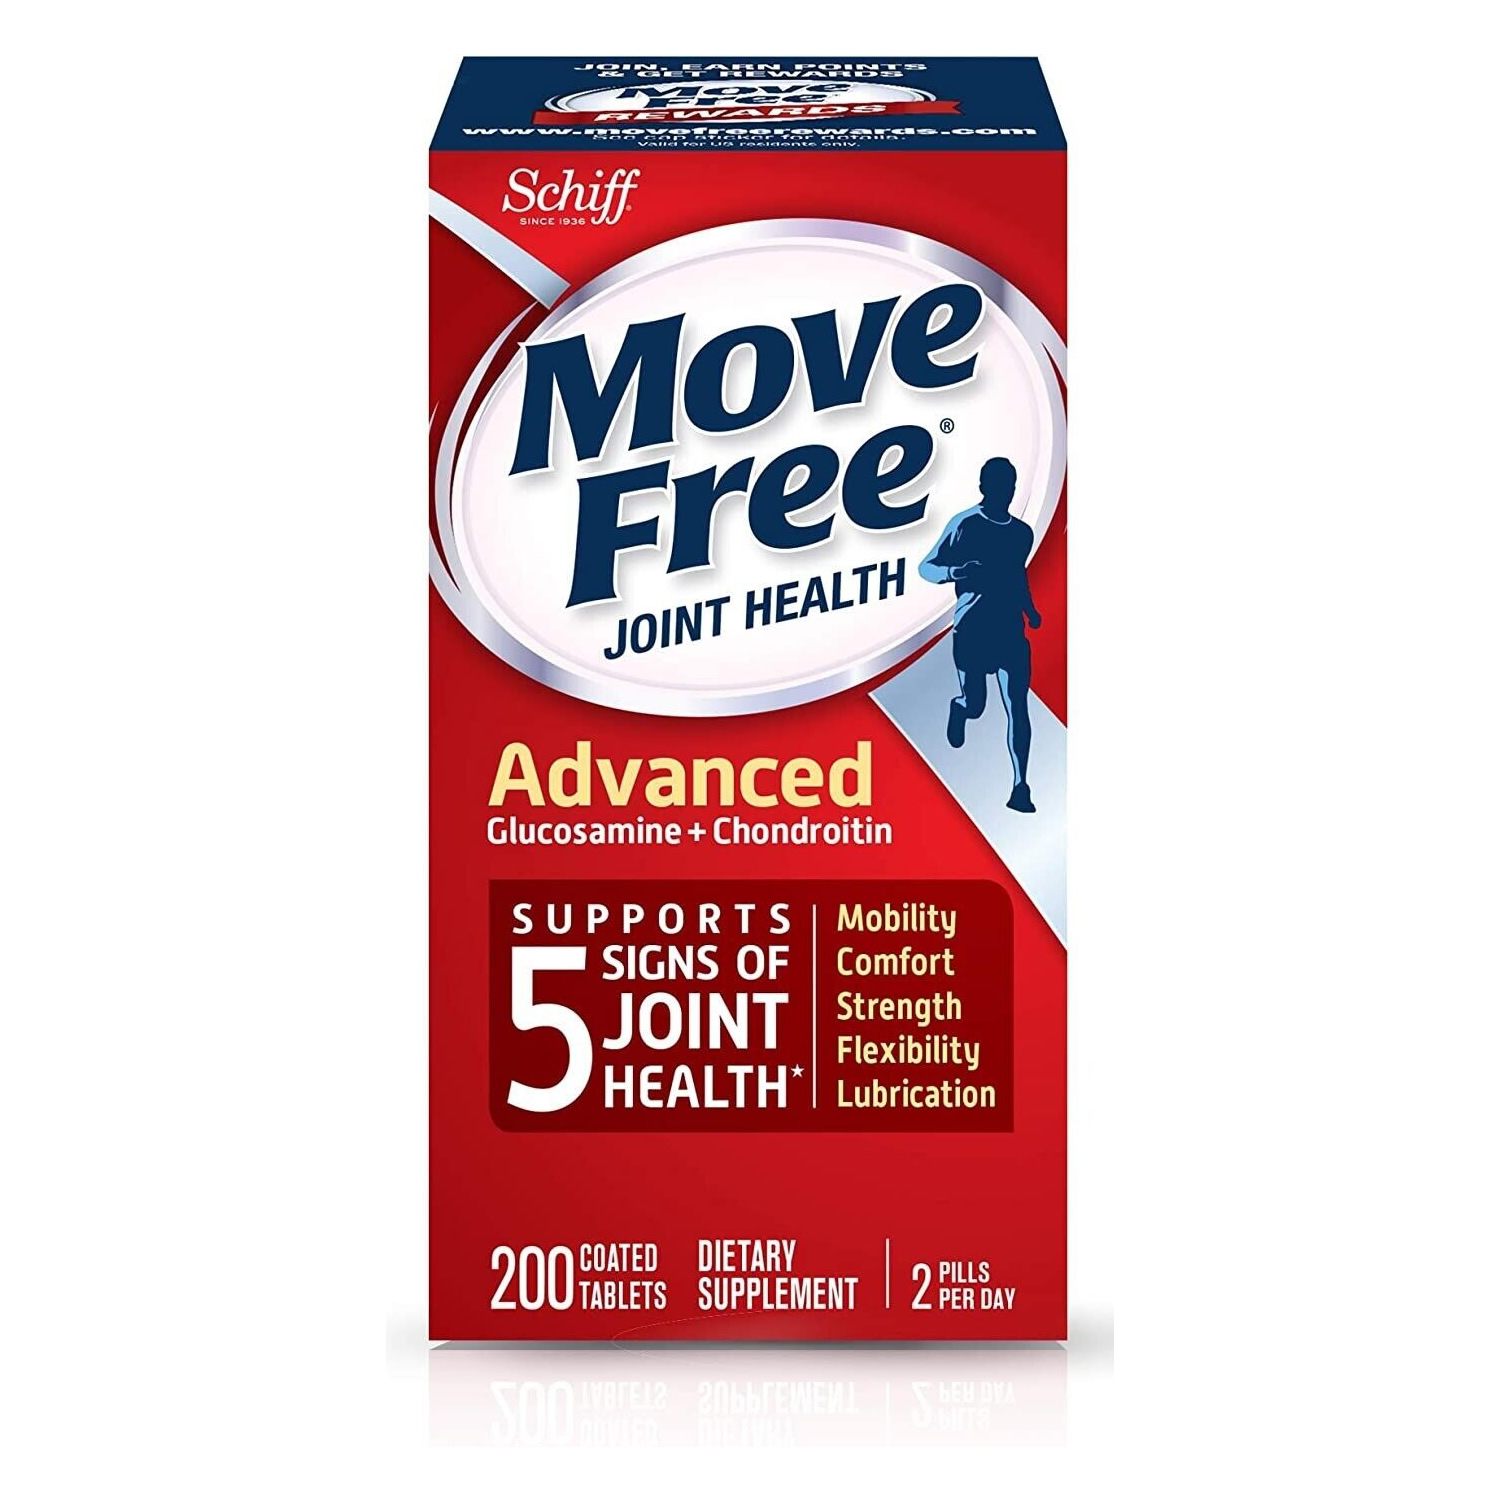 Schiff Move Free 维骨力 葡萄糖胺 氨糖 含软骨素 Joint Health  Advanced Glucosamine And Chondroitin 200 Coated Tablets